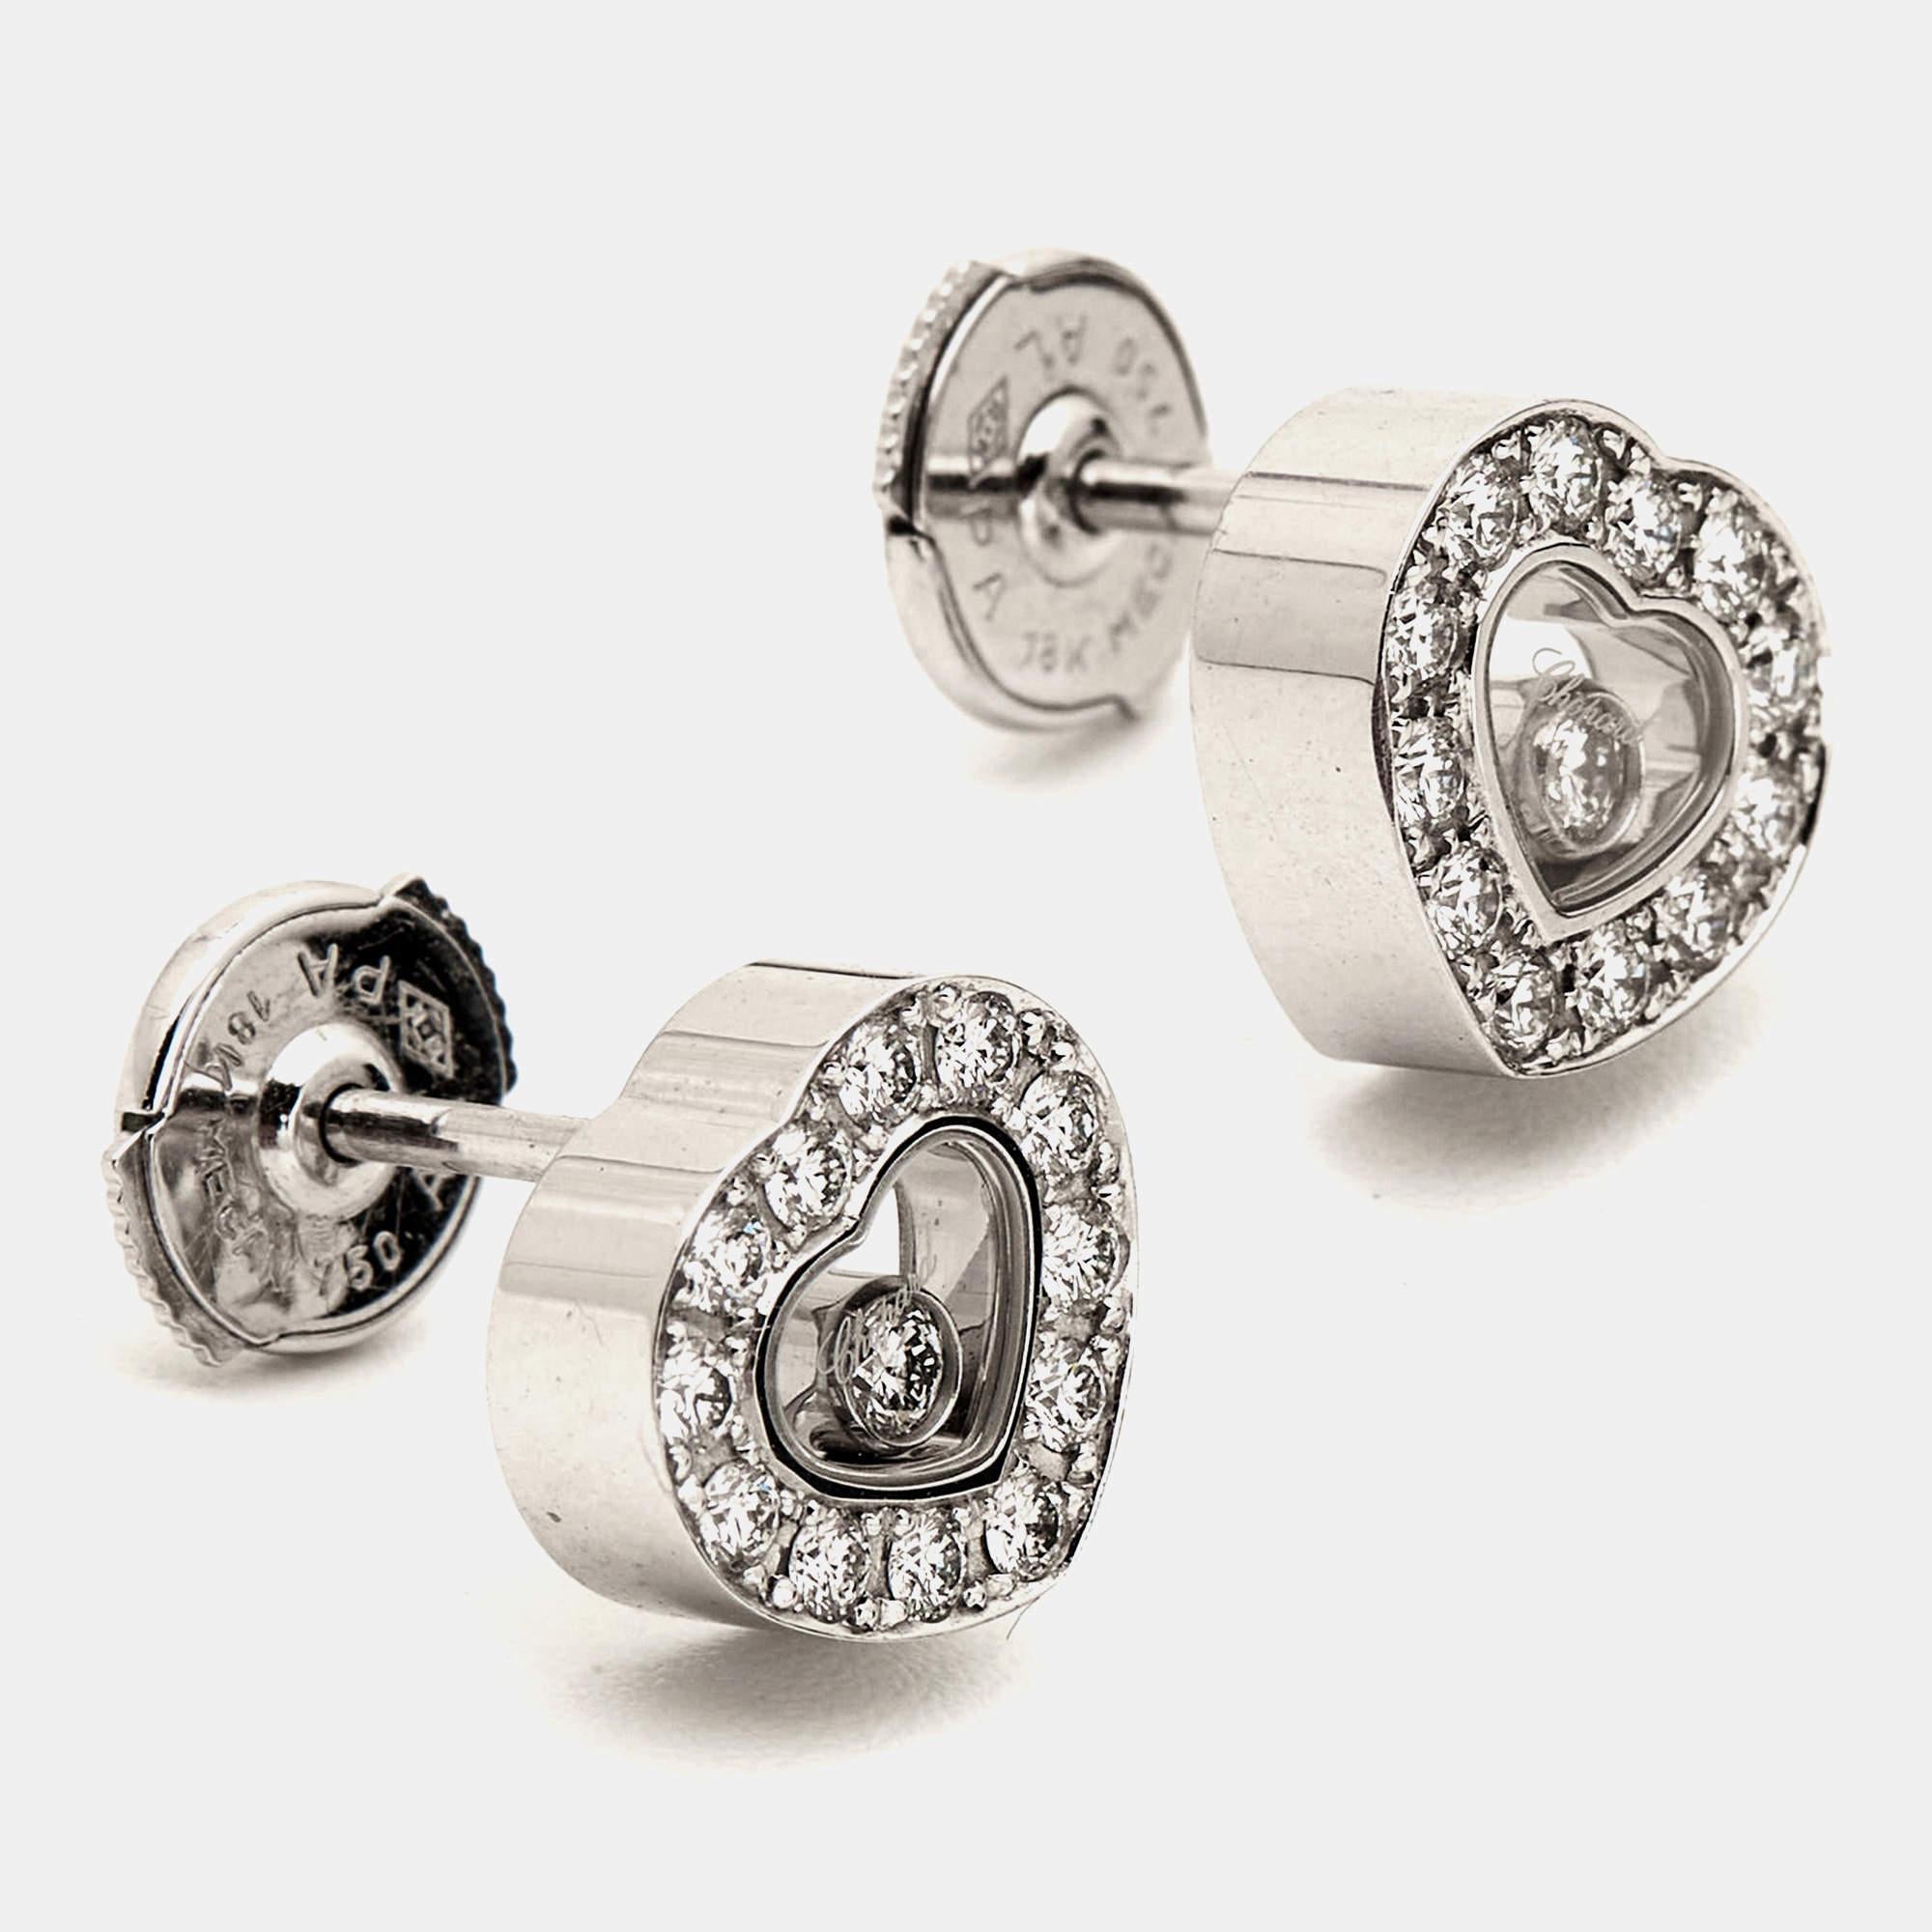 A feminine flair and a chic appeal characterize these stunning Chopard Icon earrings. Sculpted from high-grade materials, they will look beautiful when you style them with your outfits and other accessories.

